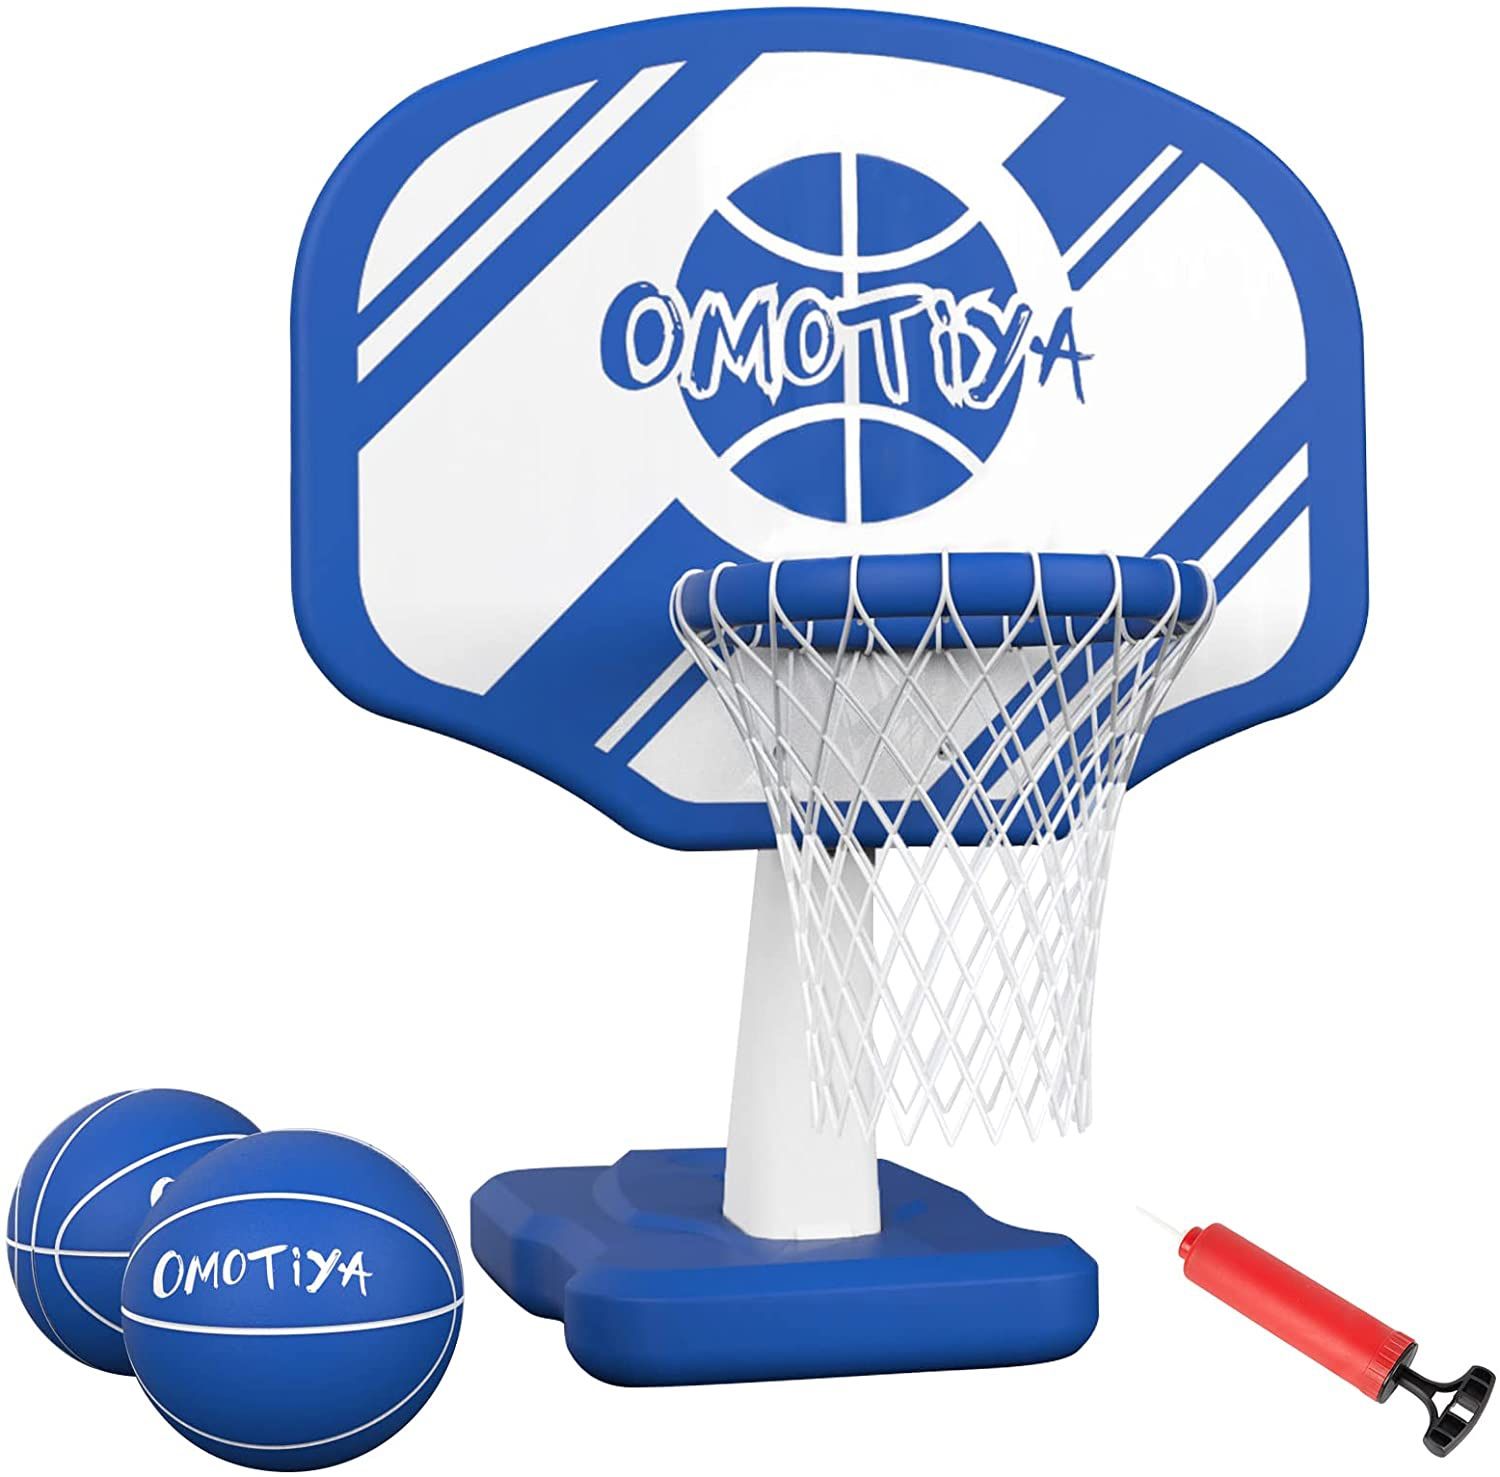 Swimming Pool Basketball Hoop with Base, Portable Outdoor Basketball Hoop for Poolside with 2 Balls and Pump, Pool Toys Game for Boys and Girls, Kids,